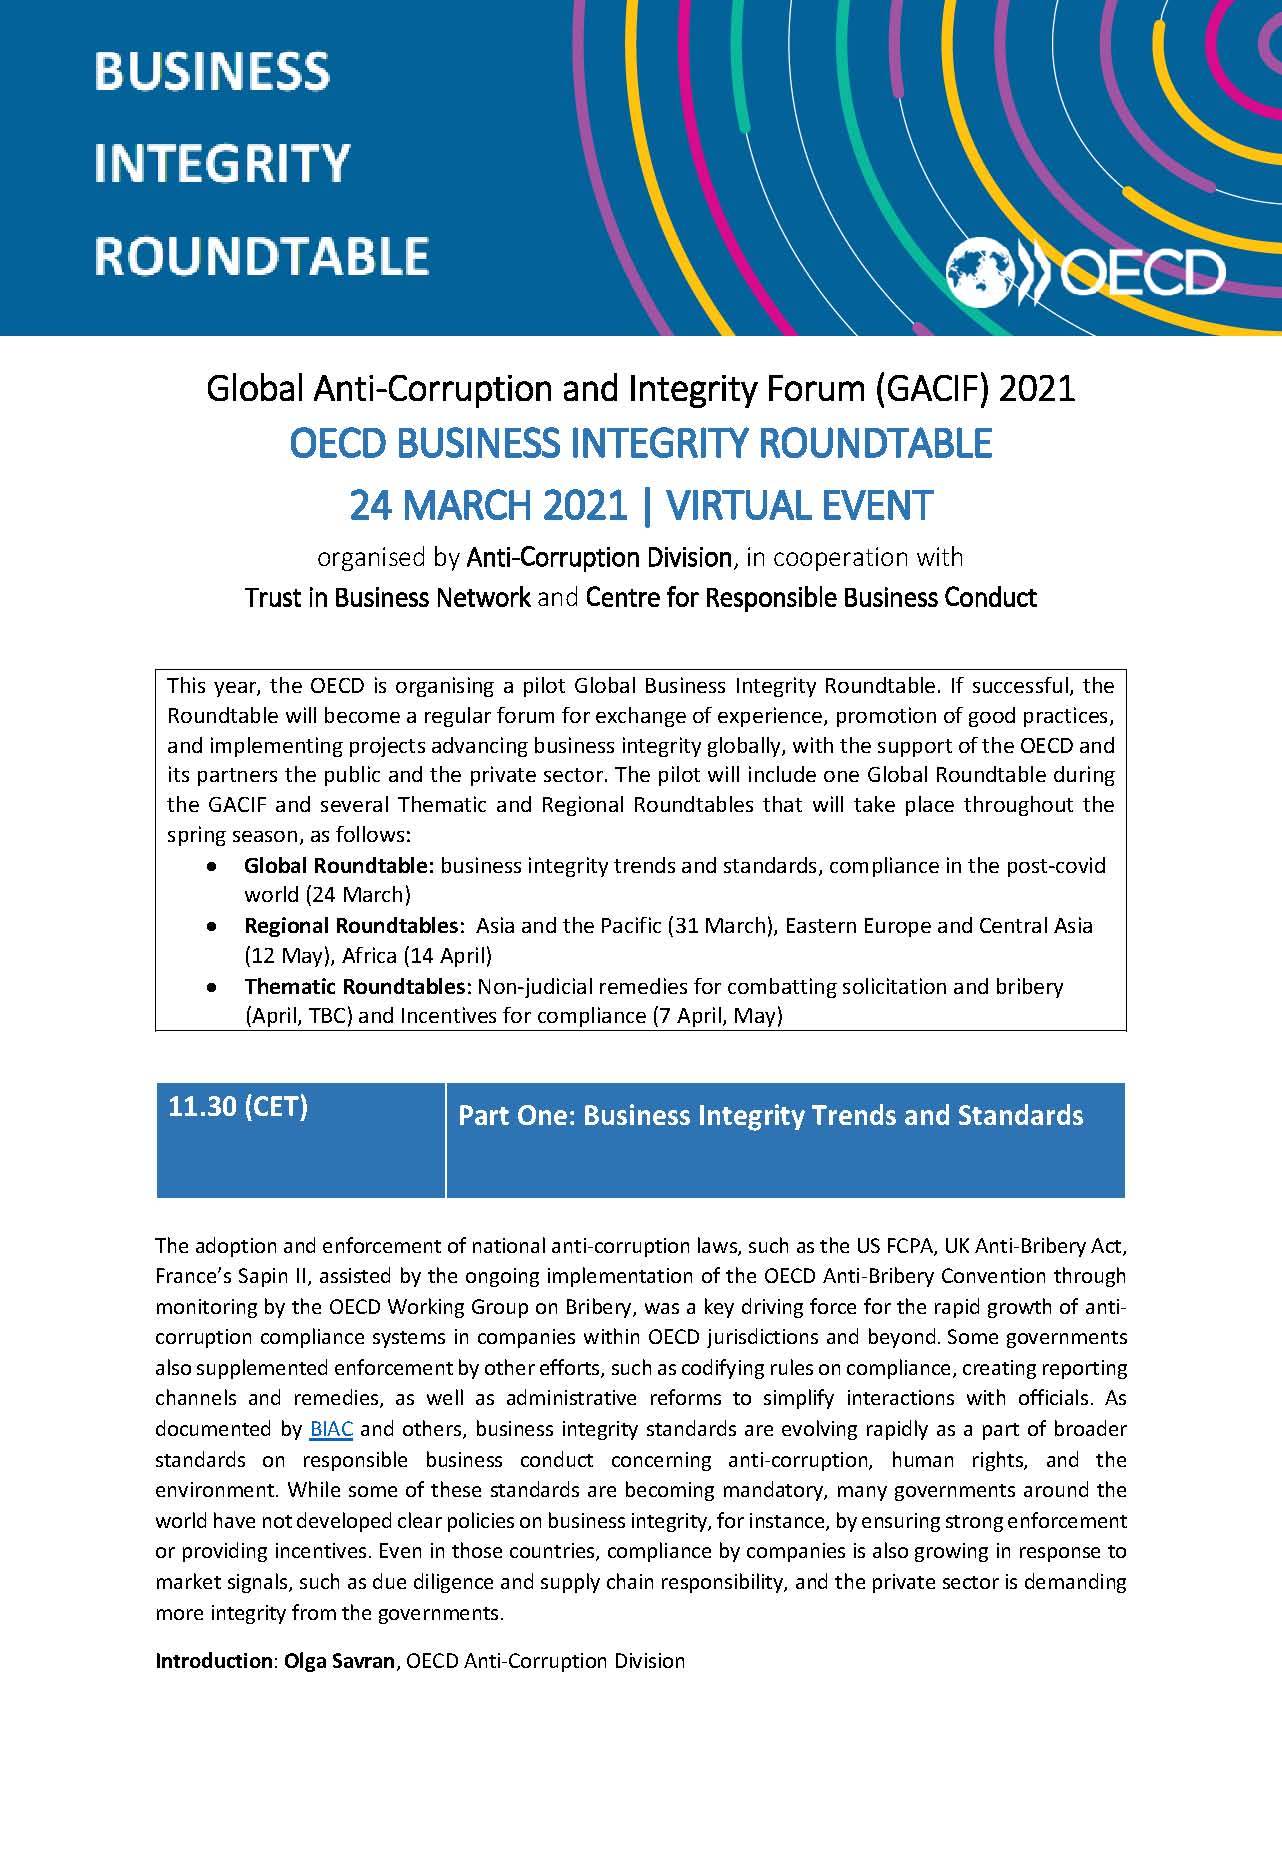 Business Integrity Trends, Standards, and the Future of Compliance in a Post COVID-19 World